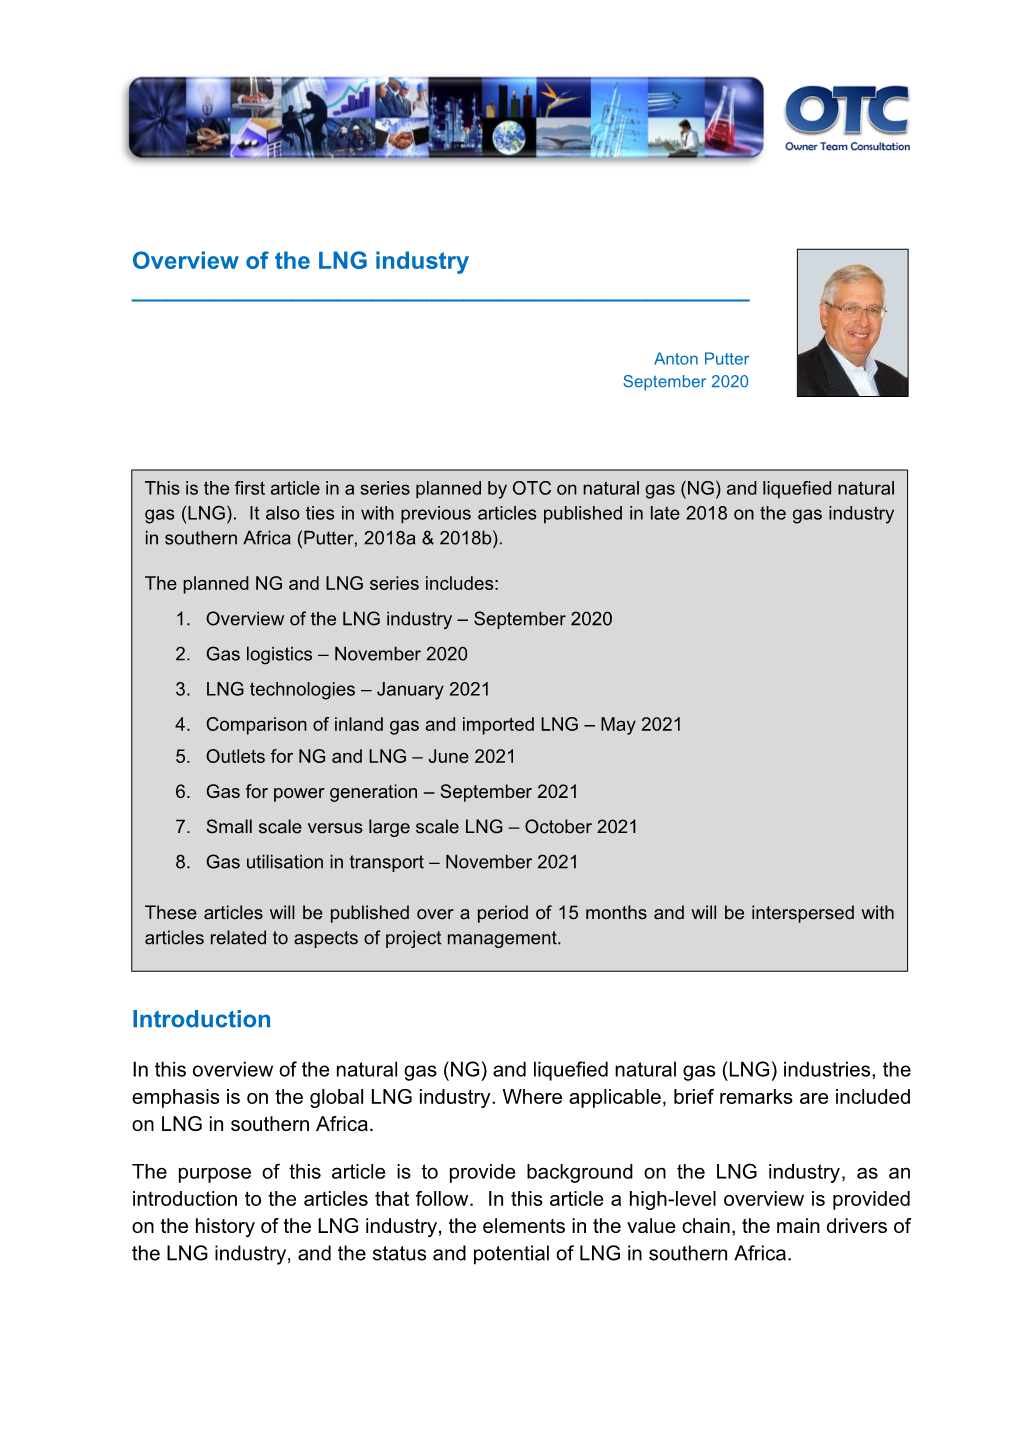 Overview of the LNG Industry Introduction